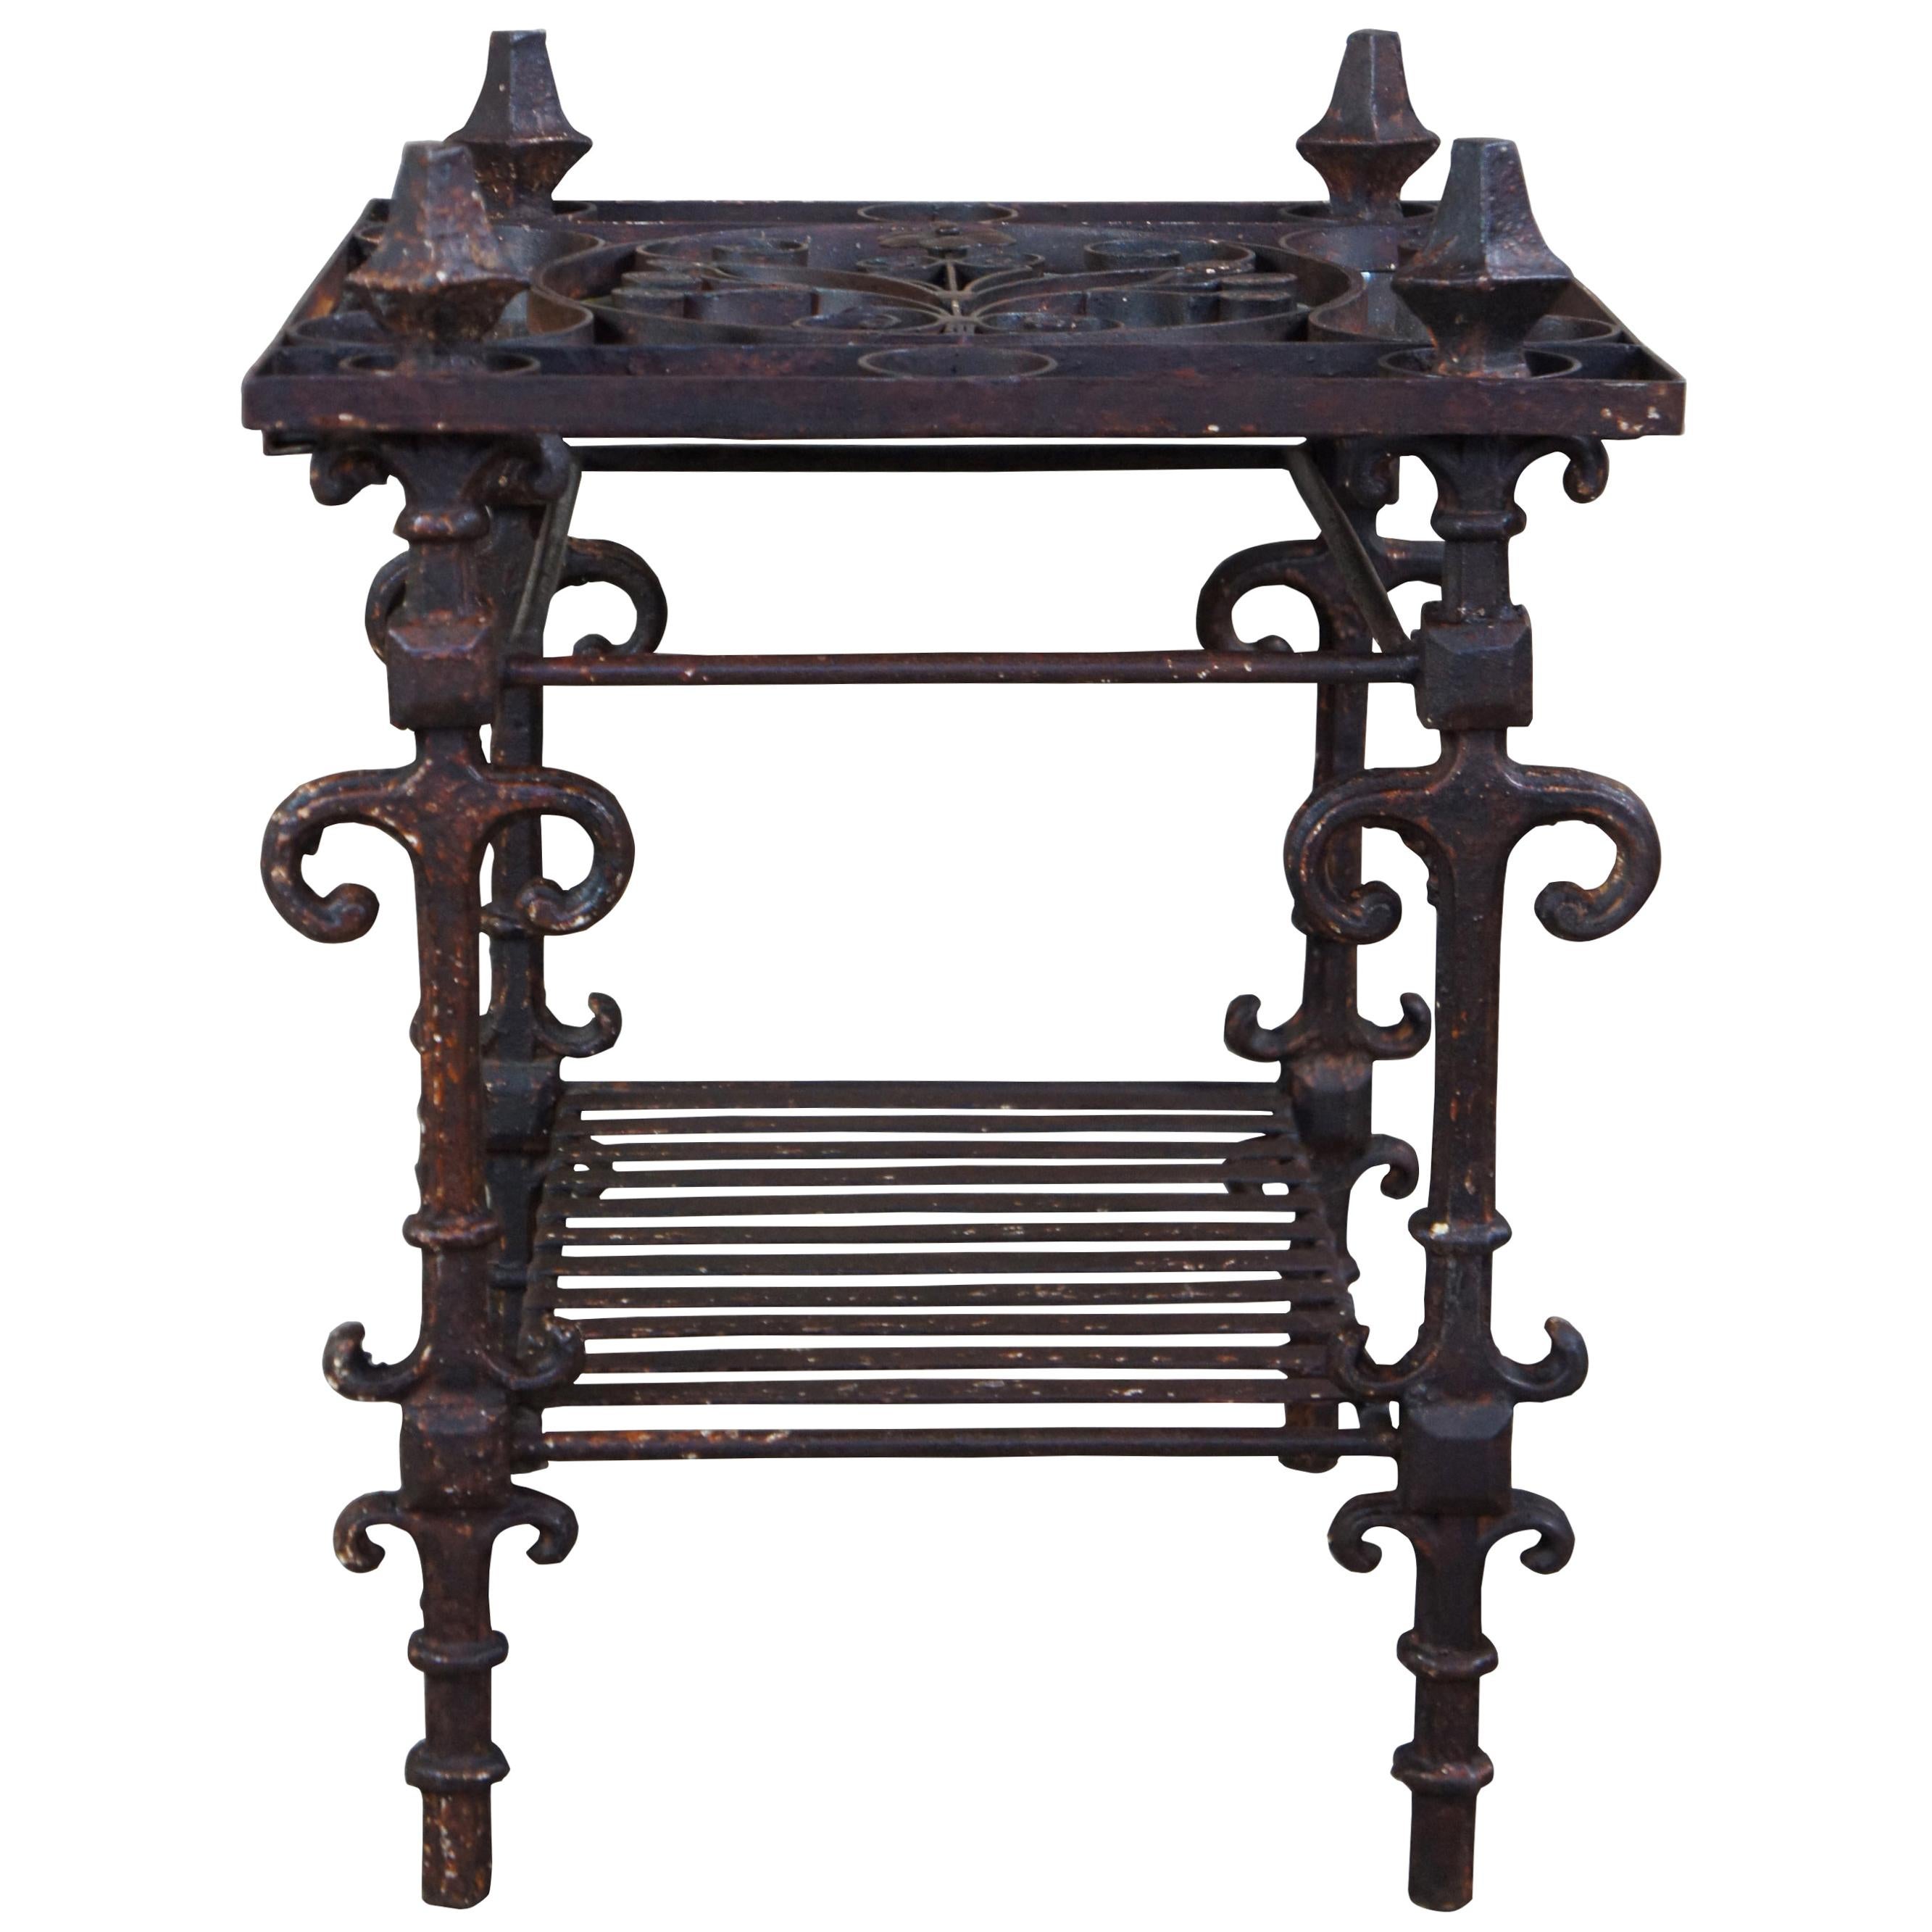 Old World Rustic Iron 2-Tier Mirrored Arhaus Ornate Scrolled Iron Side End Table